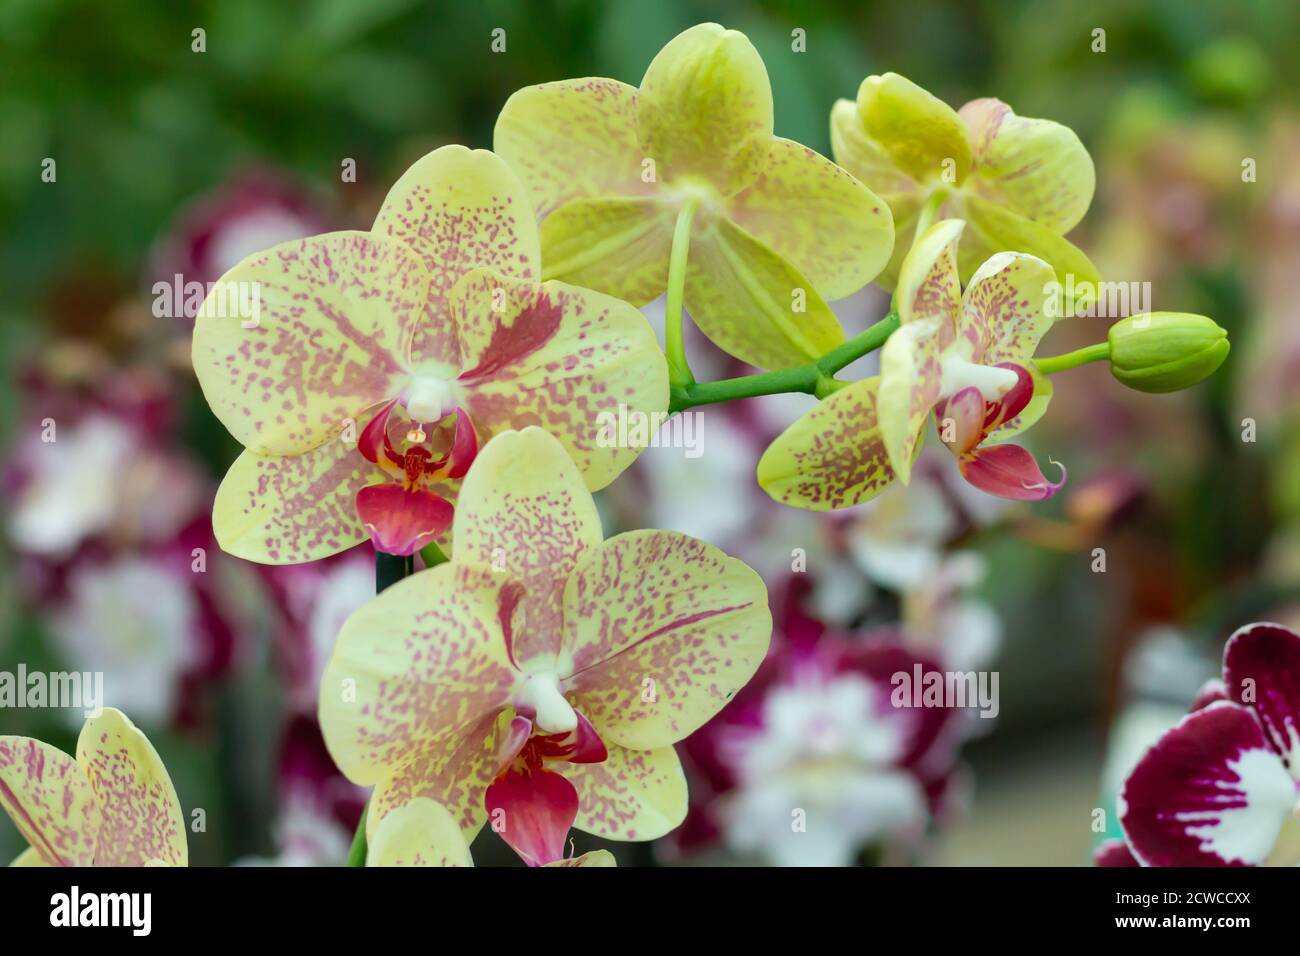 Branch of yellow orchid flower in greenhouse or tropical garden close-up Stock Photo